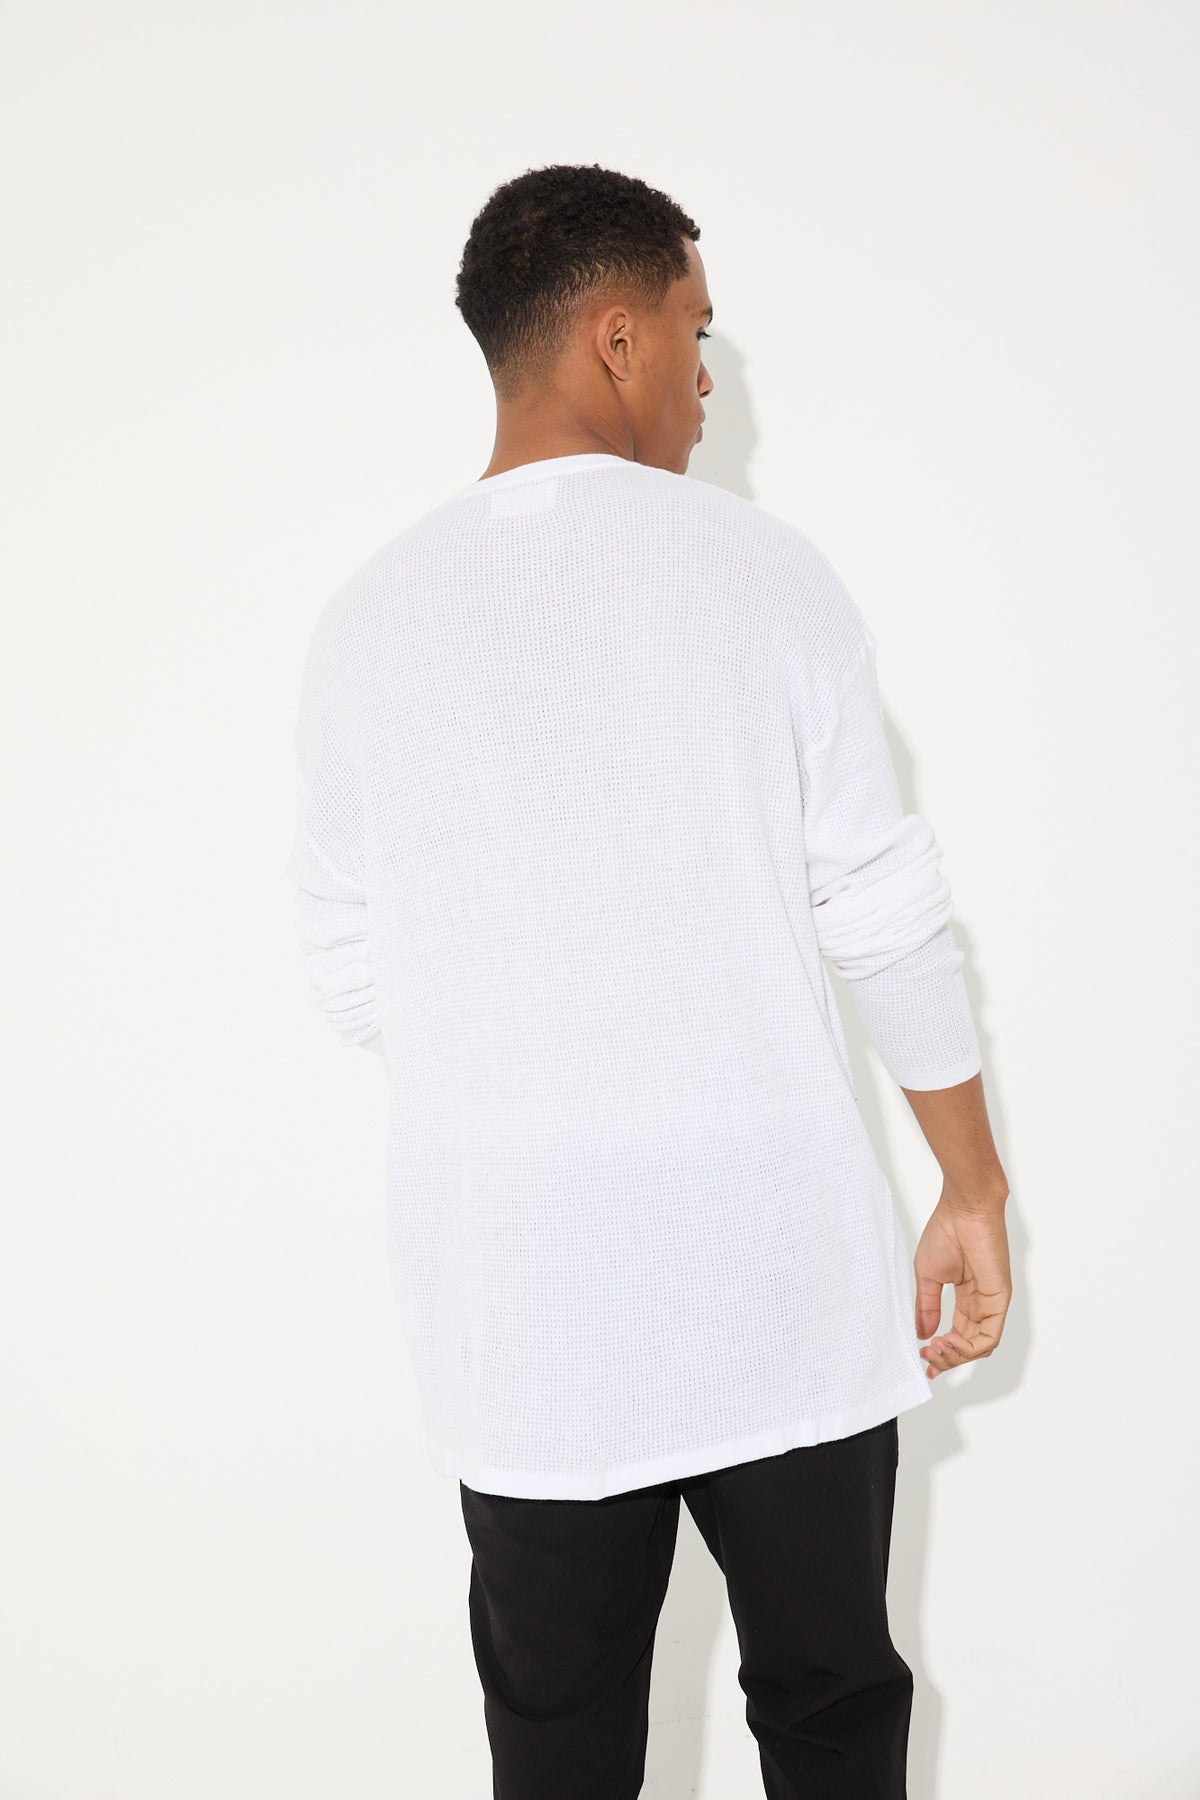 NTH Knitted Long Sleeve White - SALE